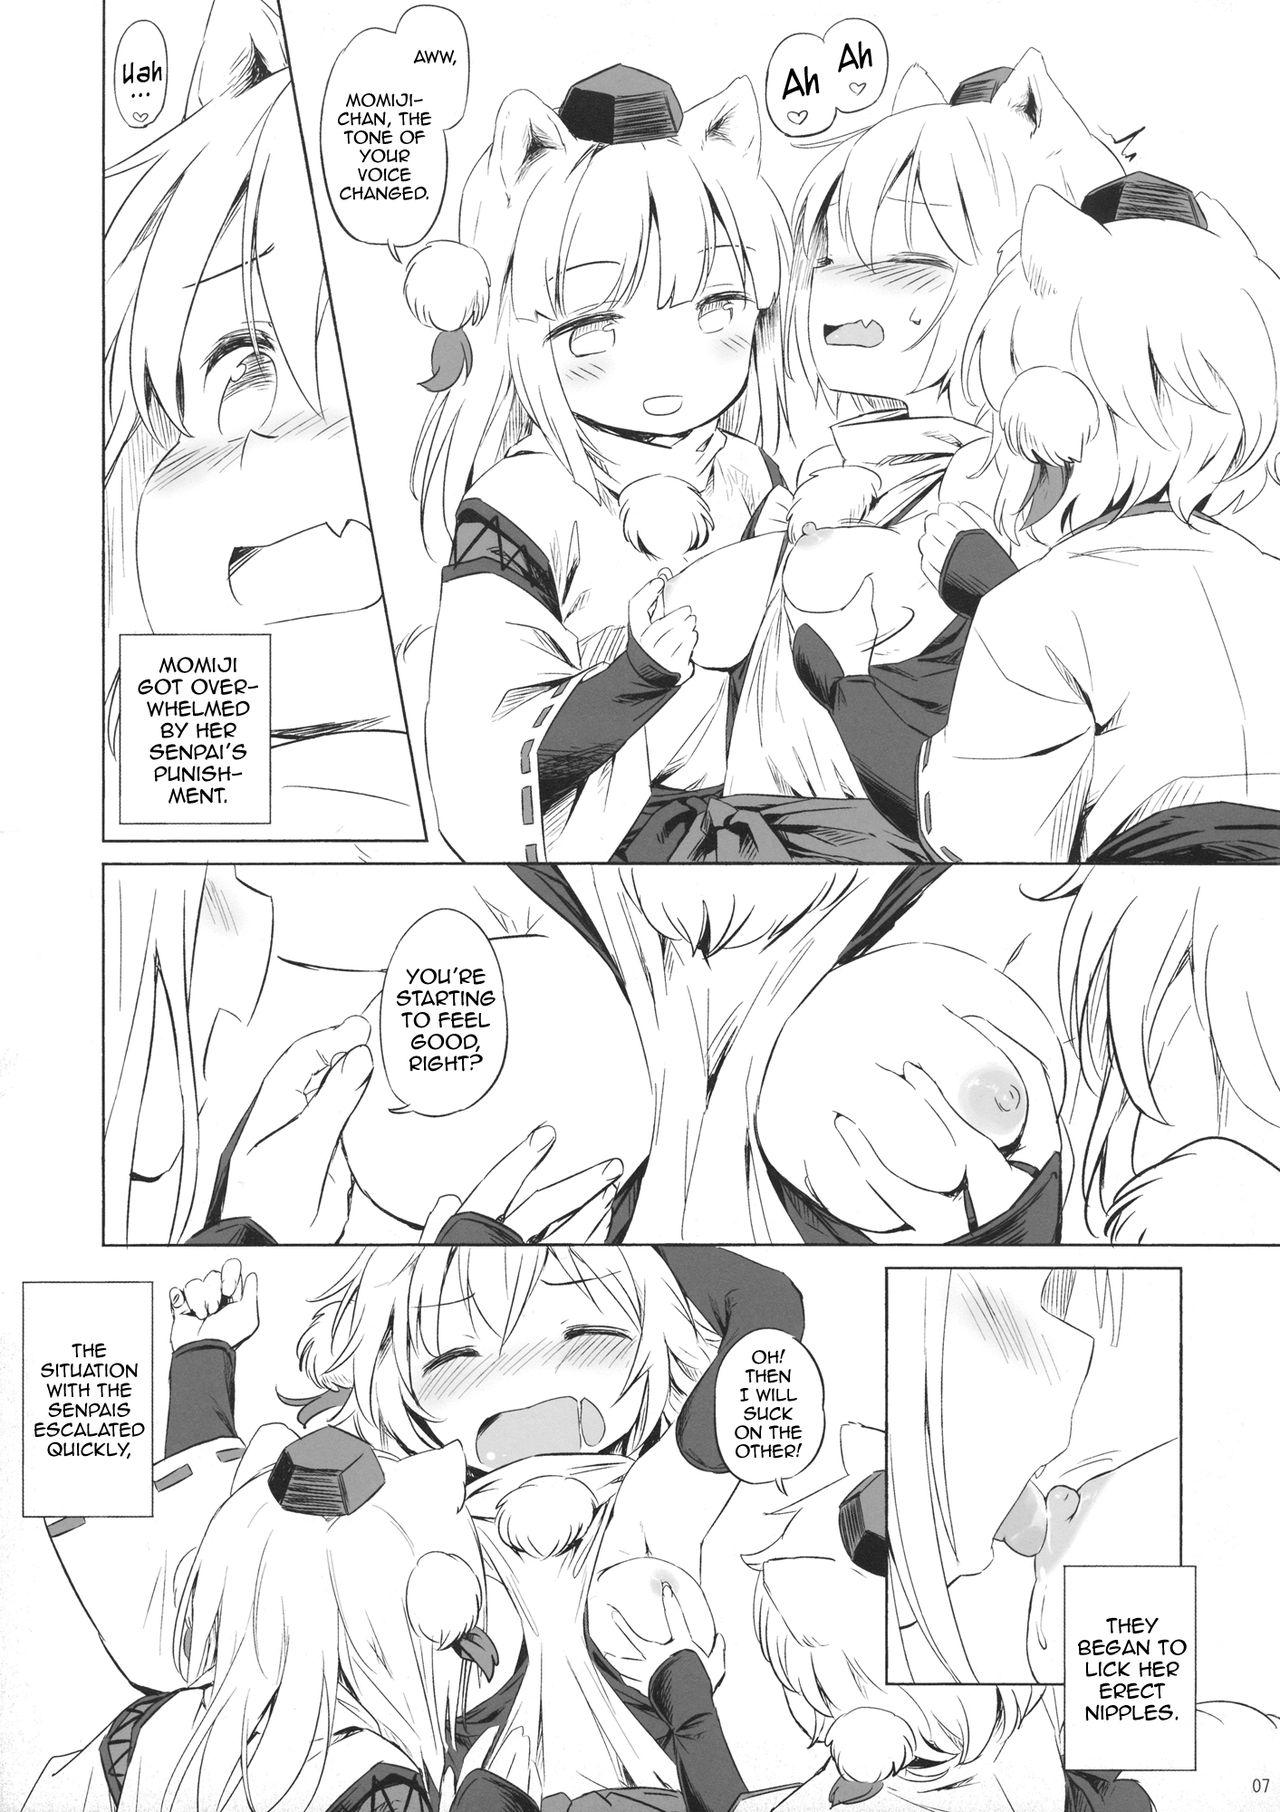 Short Kisetsu no Wanko | All around the four seasons with Doggies - Touhou project Best Blowjobs - Page 6